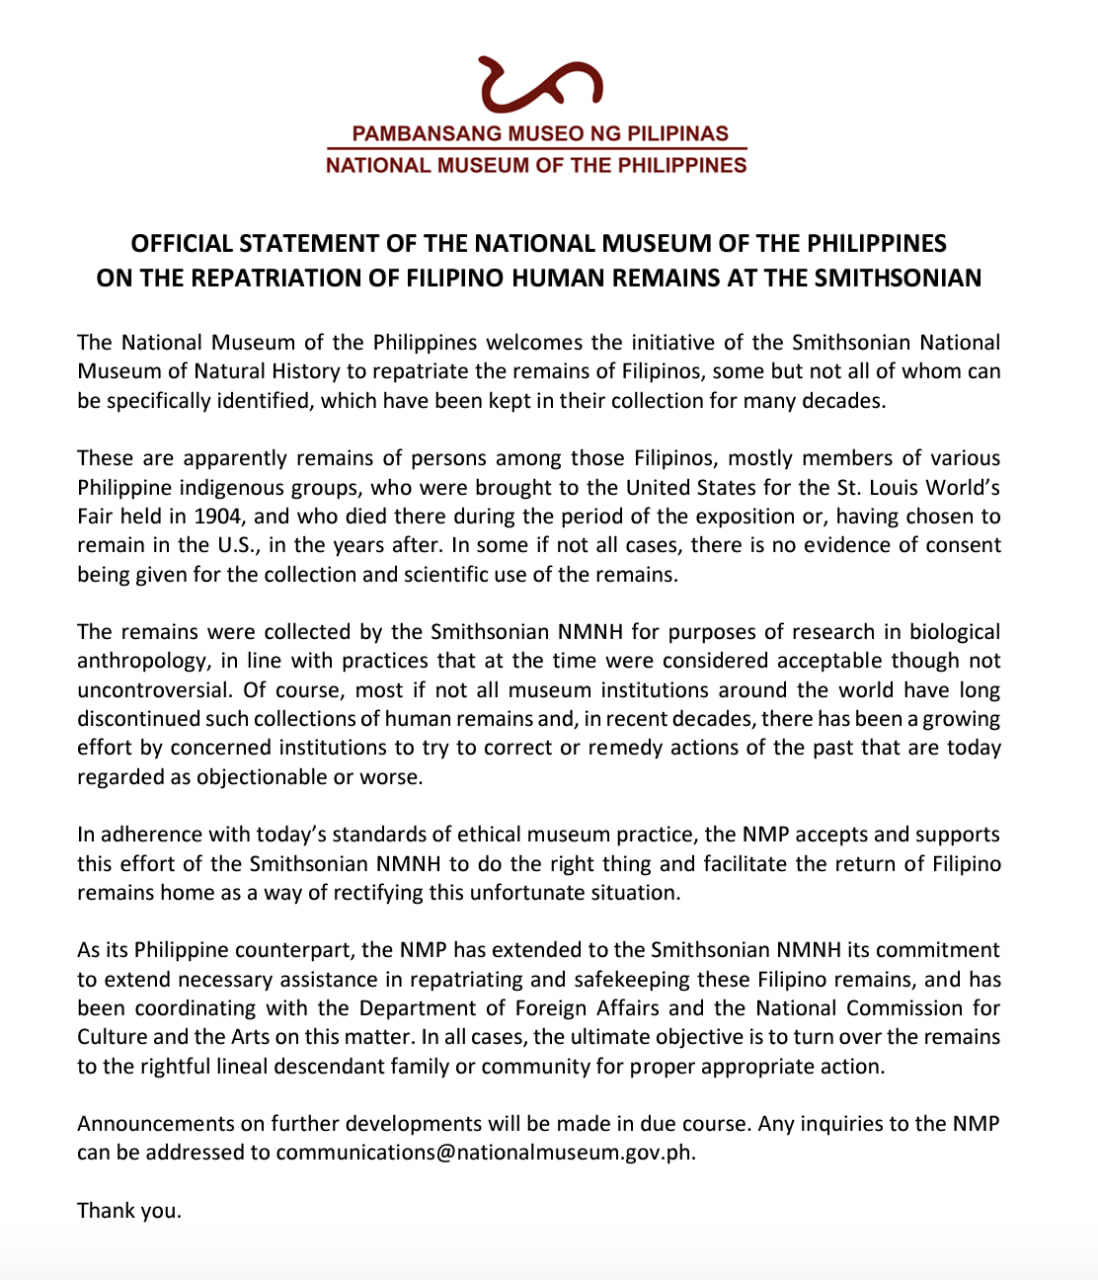 The official statement released by the National Museum of the Philippines on the repatriation of Filipino remains